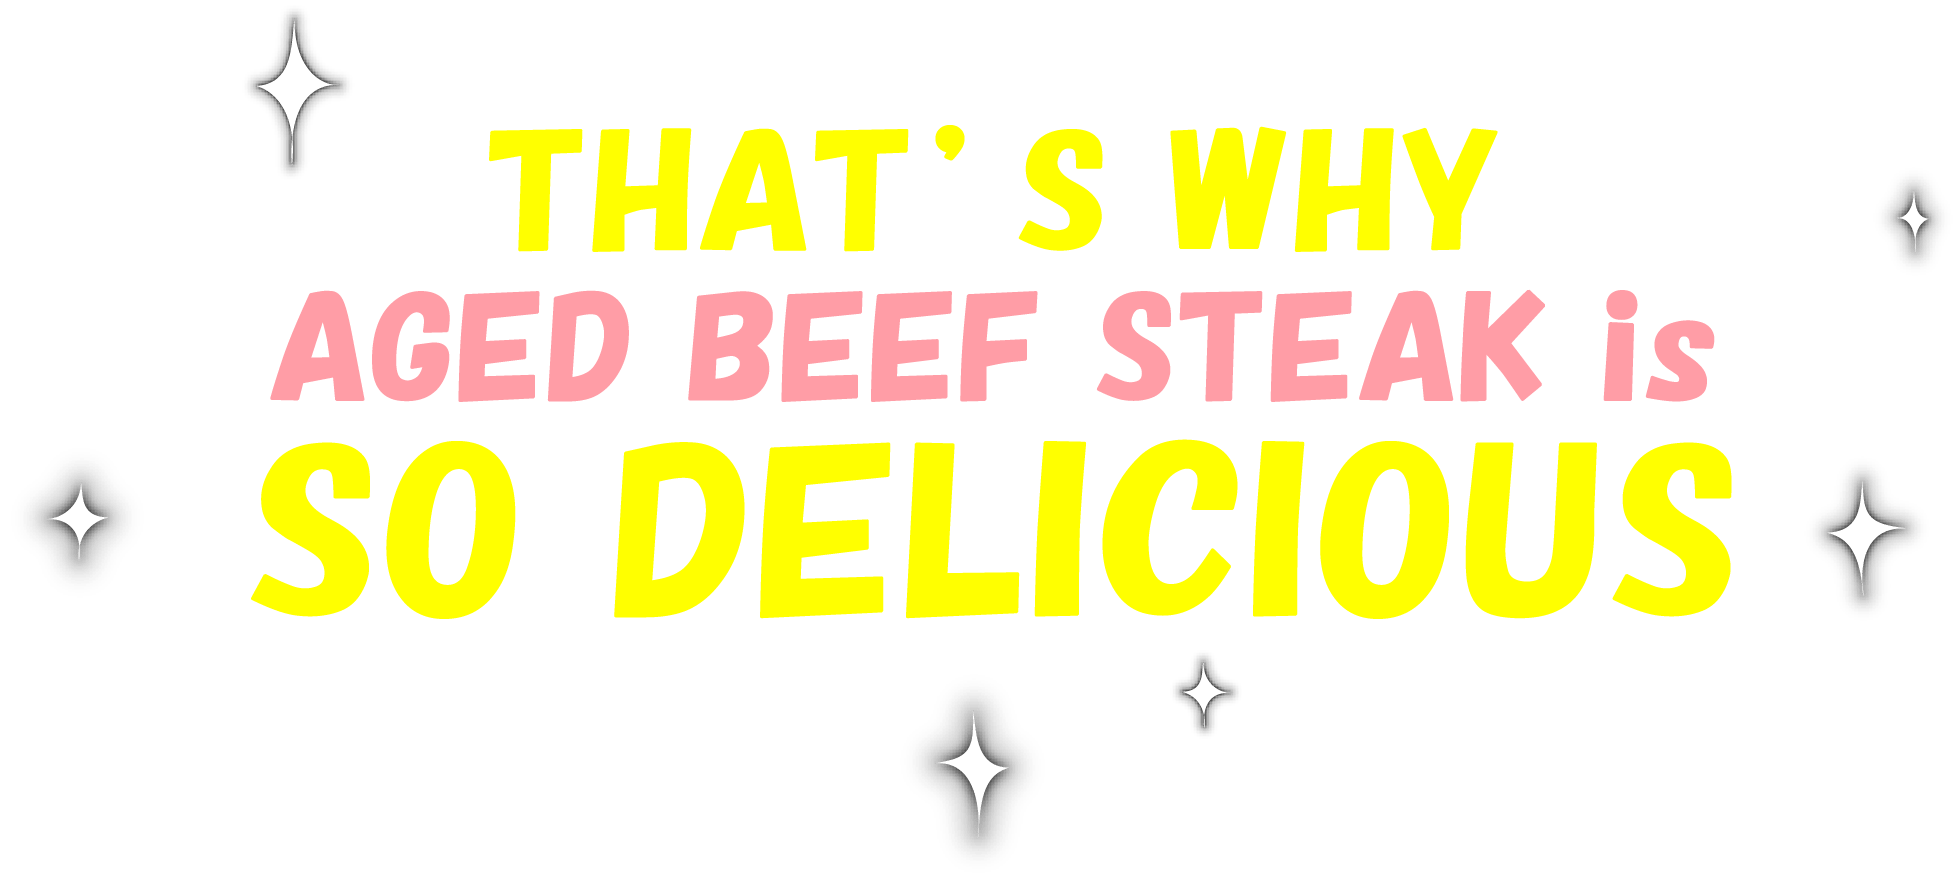 that's why aged beef steak is so delicious